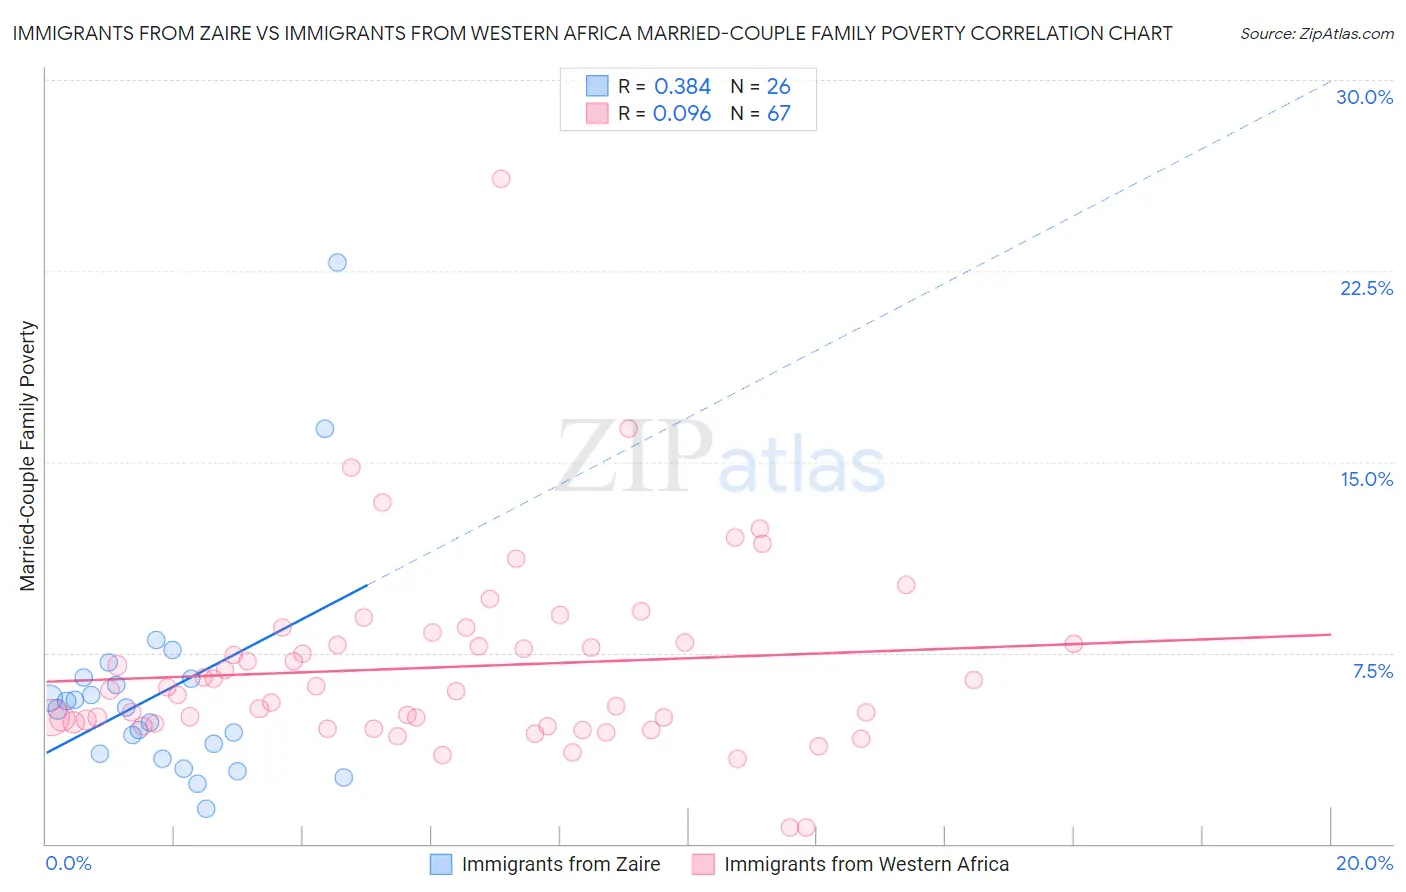 Immigrants from Zaire vs Immigrants from Western Africa Married-Couple Family Poverty